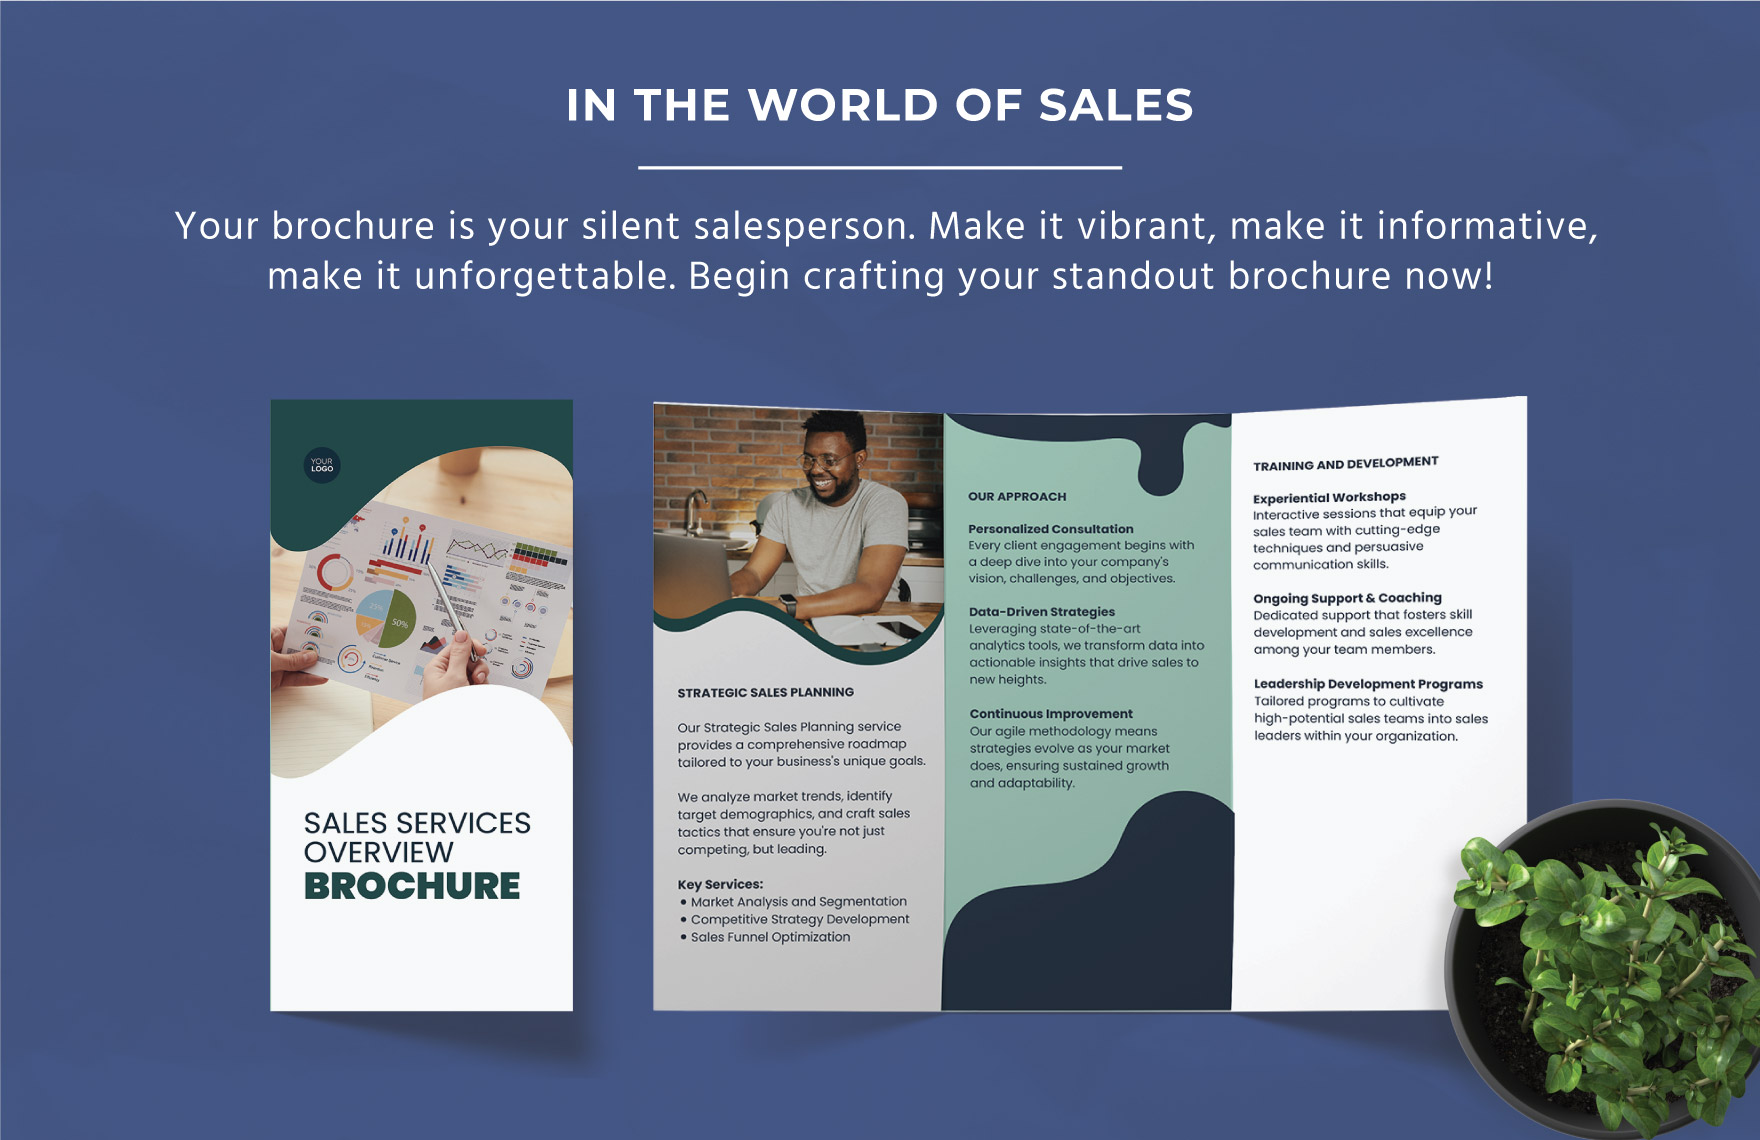 Sales Services Overview Brochure Template